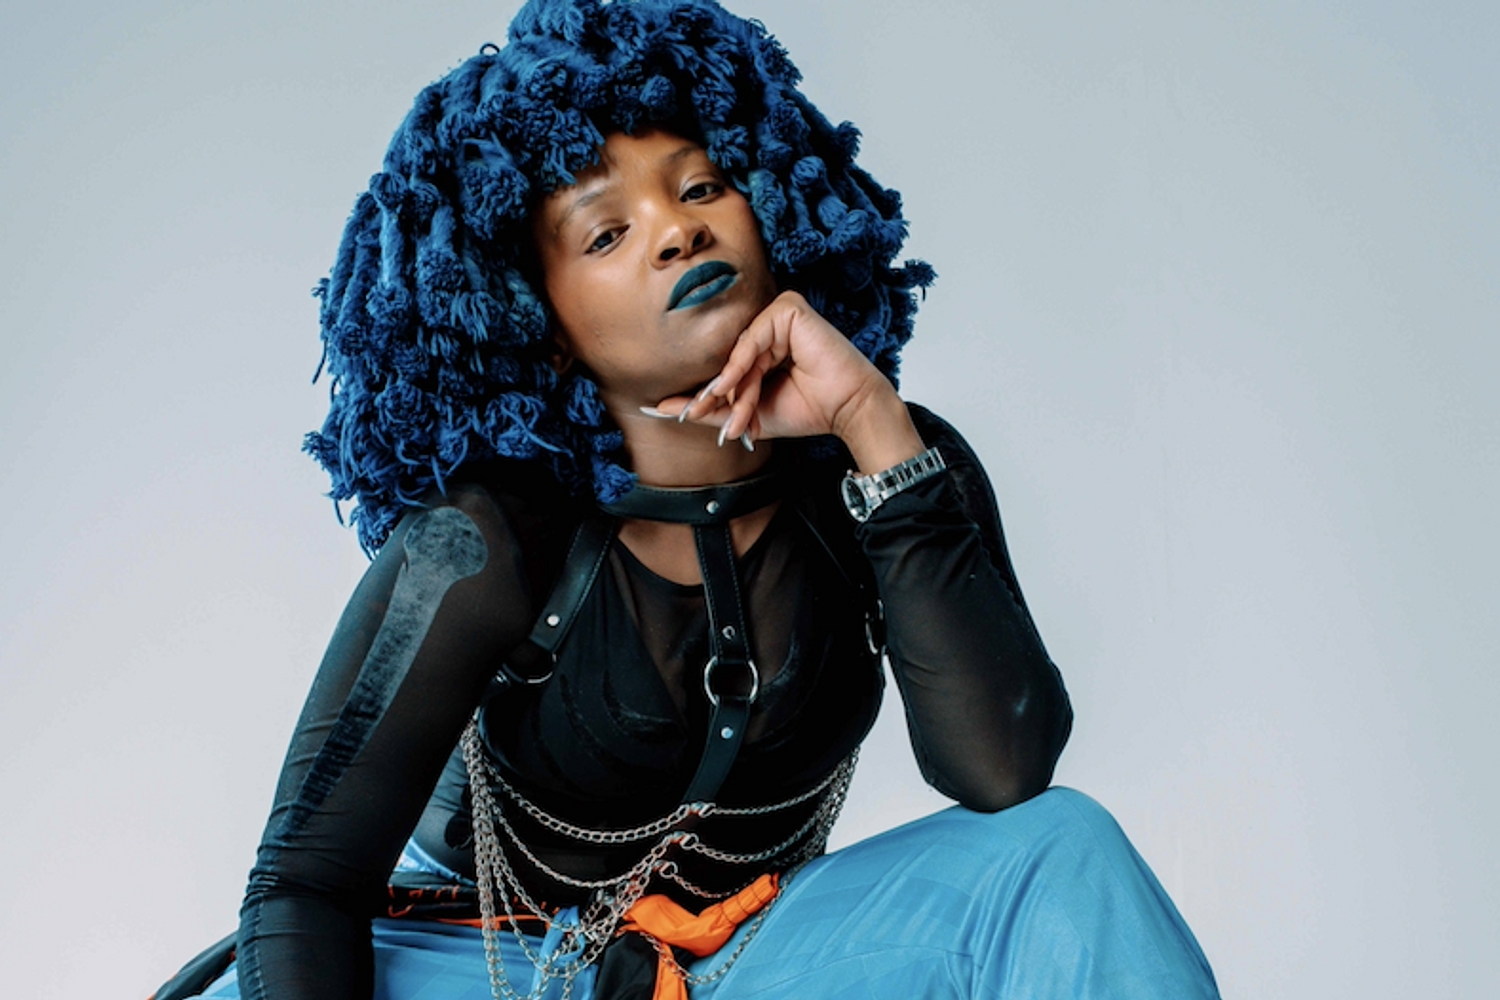 Moonchild Sanelly: "I get surprised how people fear talking about sex. Why are they scared of something they’ve enjoyed?”